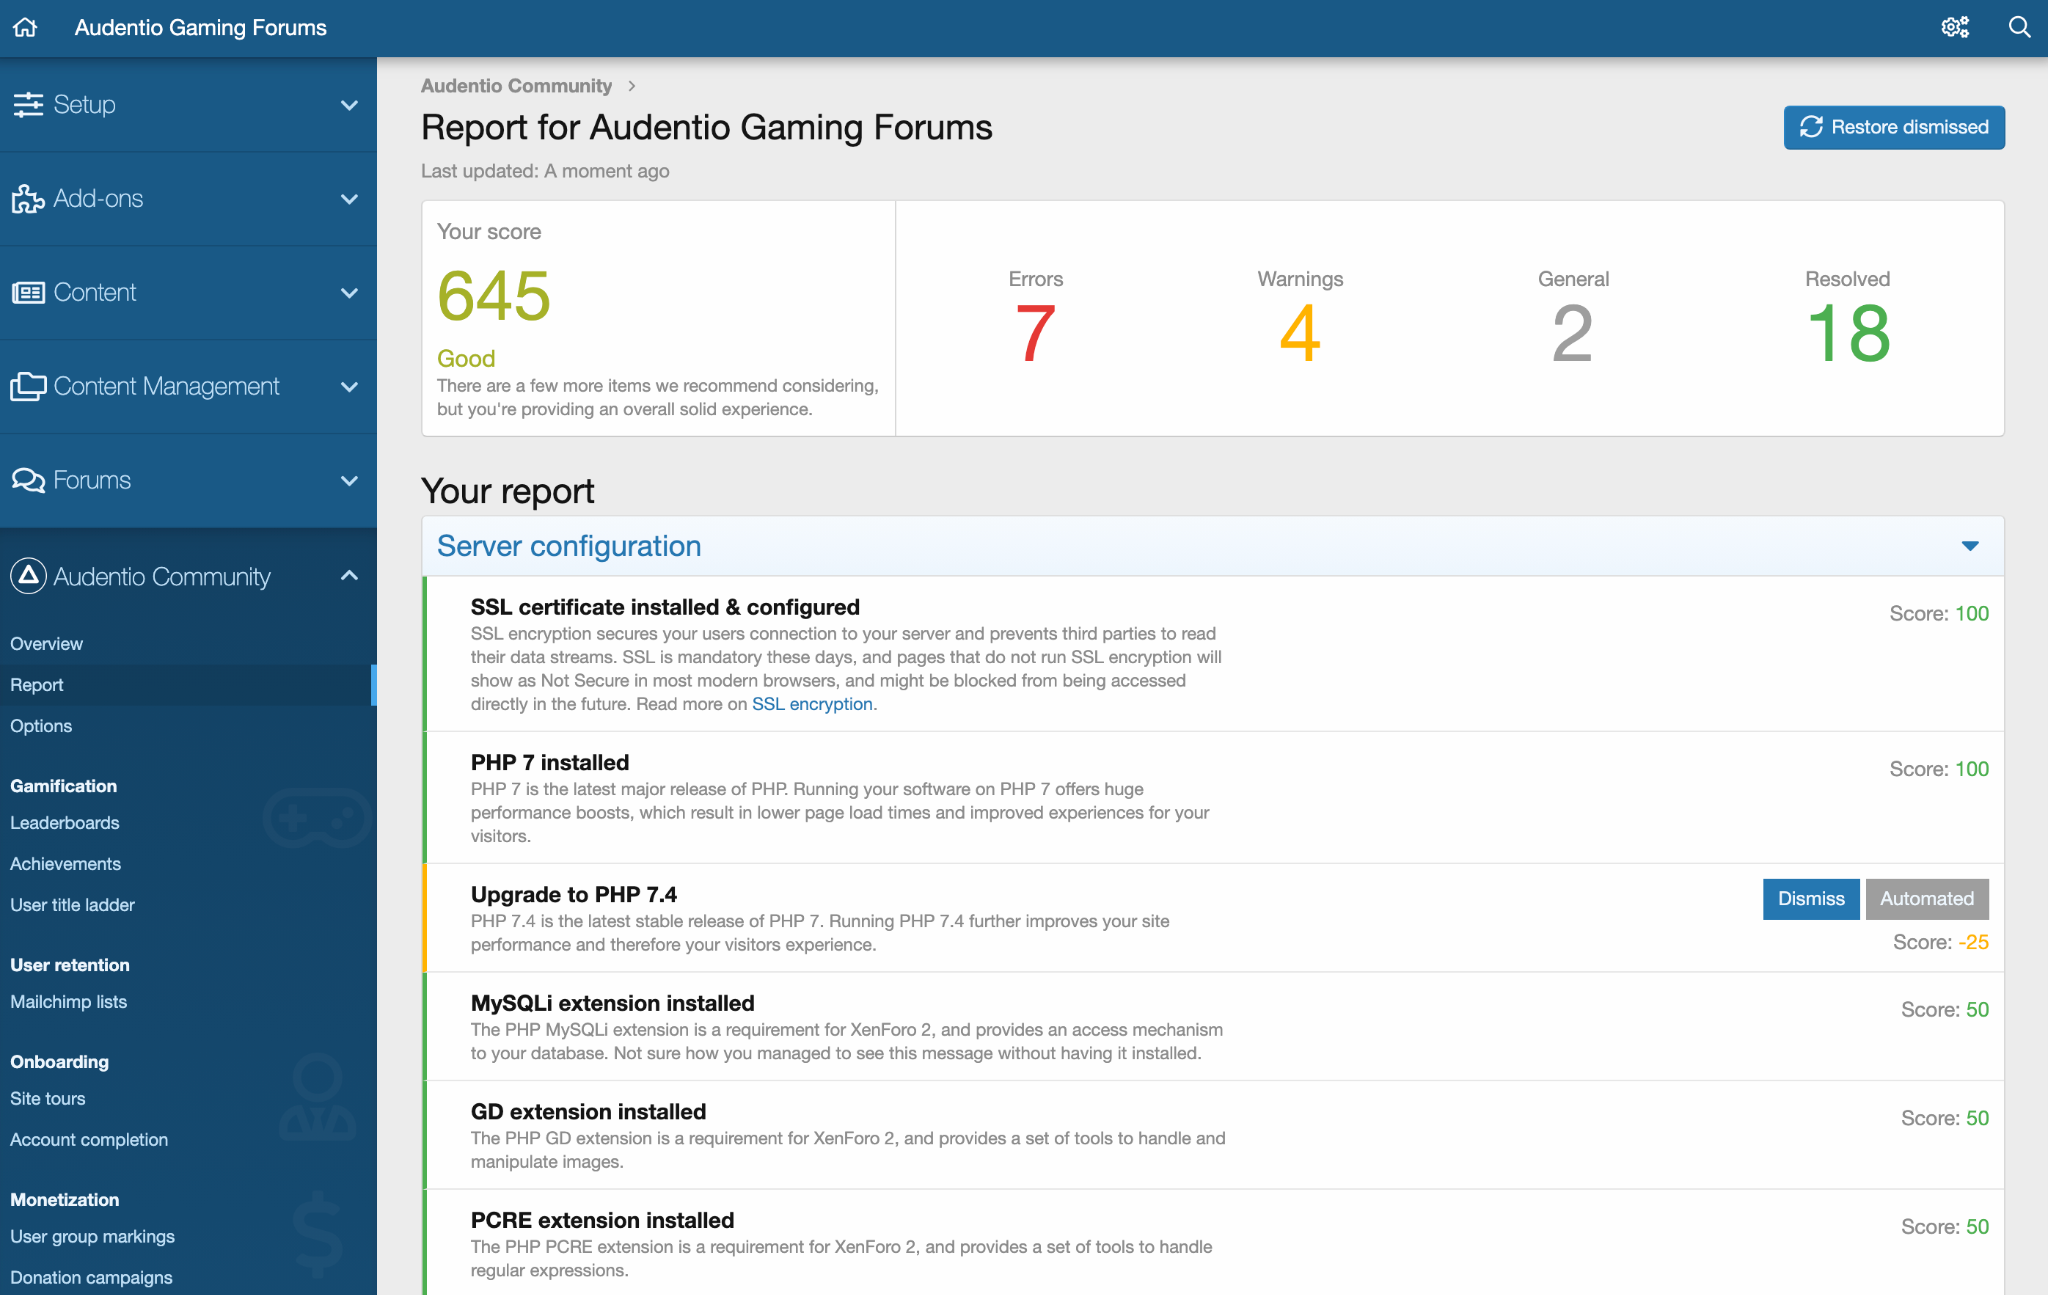  Preview of the report section within the Audentio Community add-on image